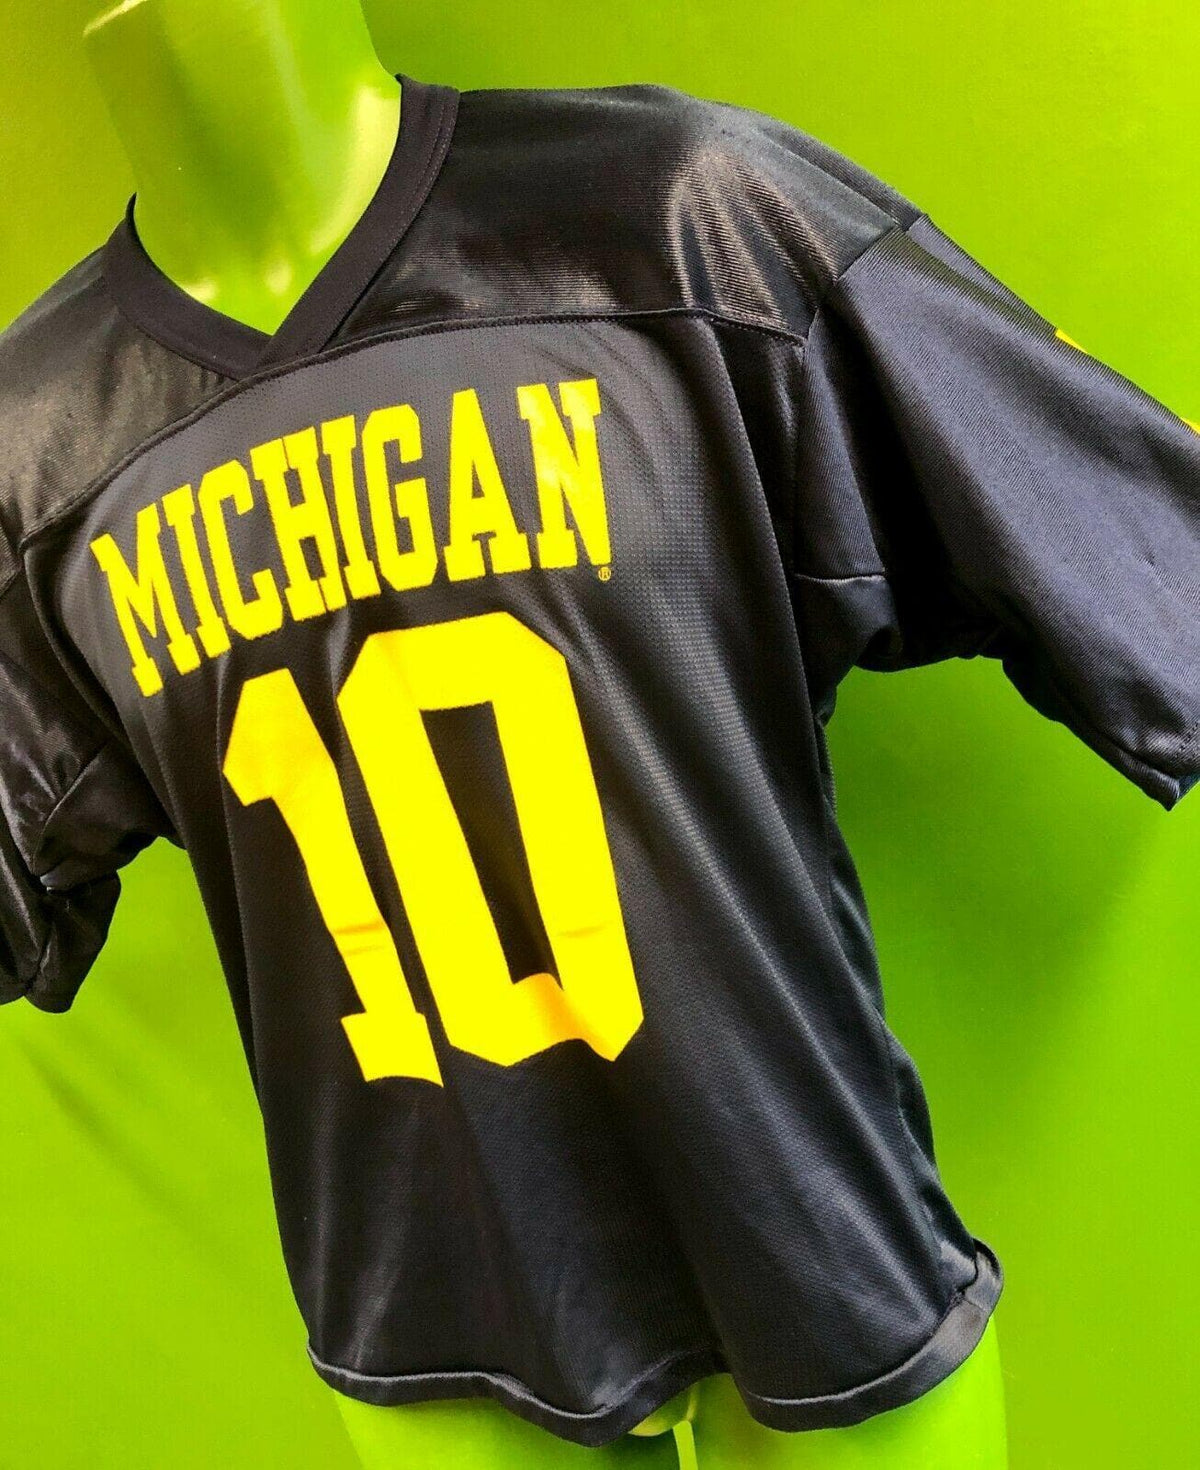 NCAA Michigan Wolverines #10 Jersey Youth Large 14-16